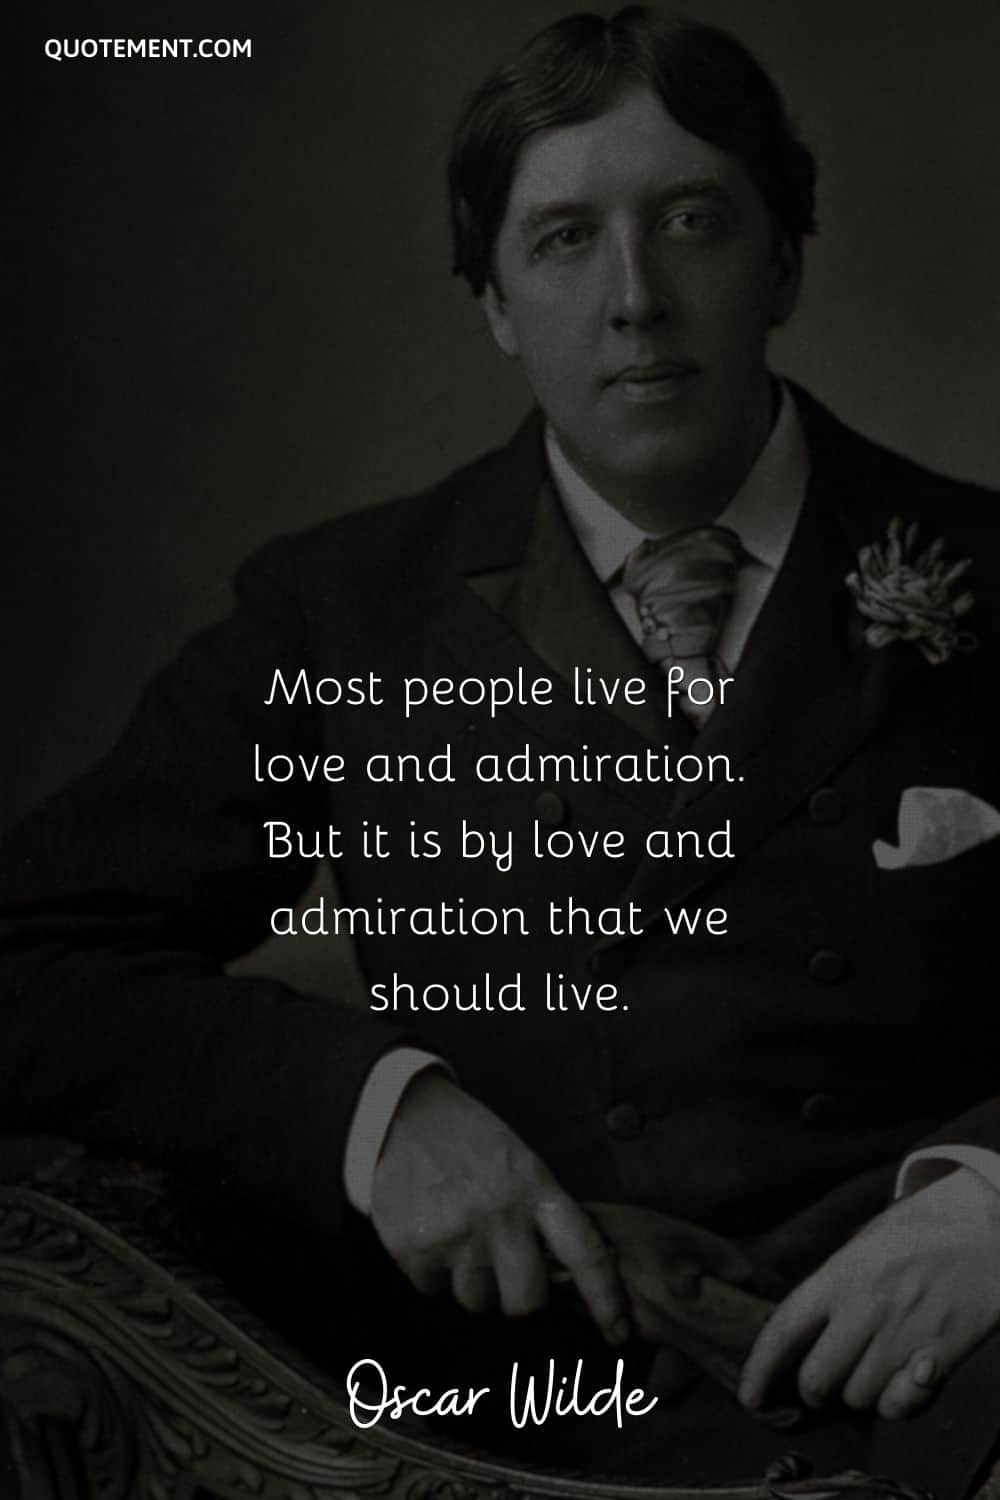 Most people live for love and admiration